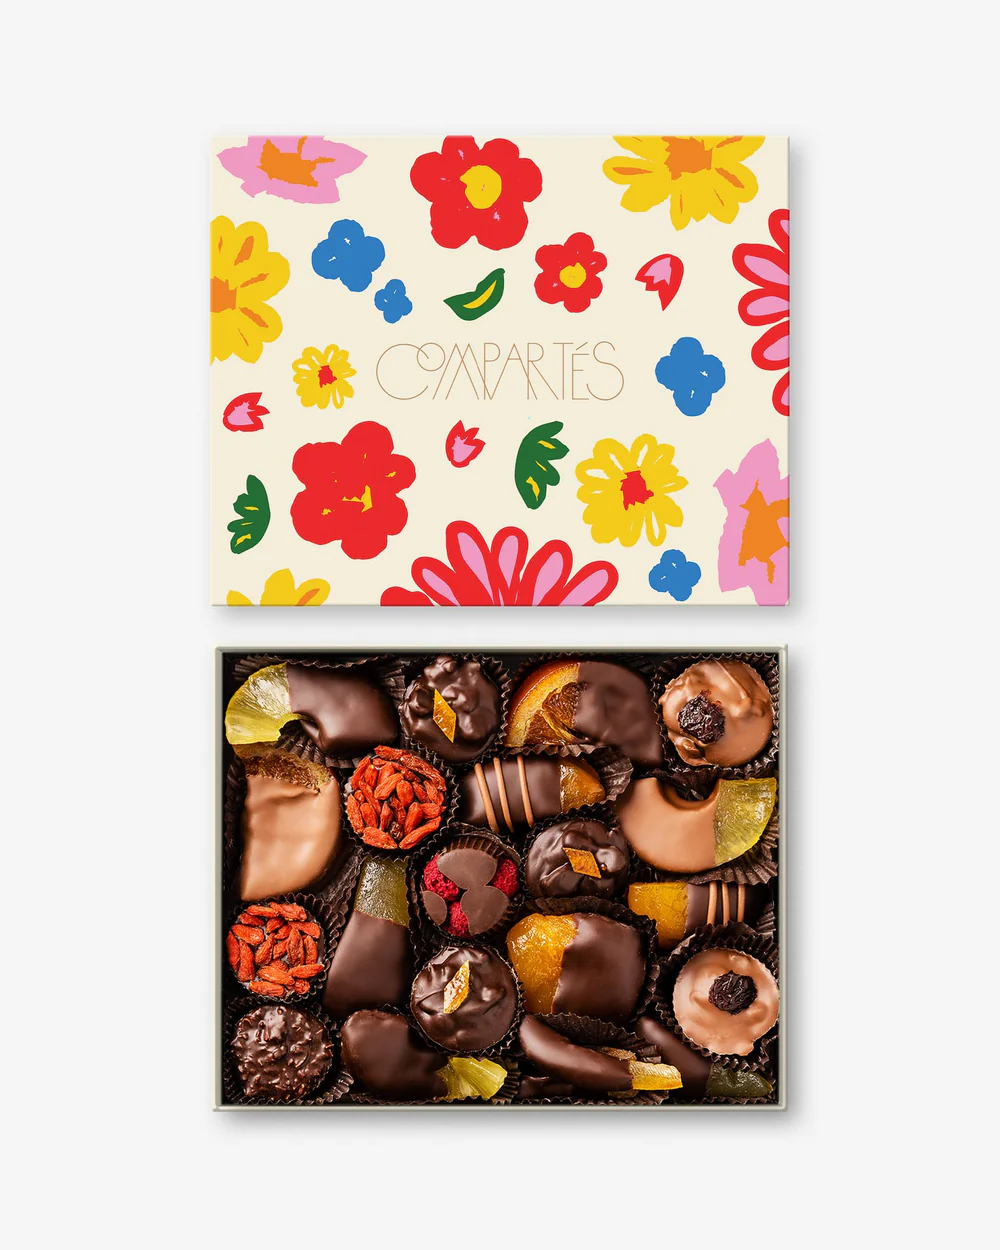 mothers day chocolate dipped fruits - flowers gift box - Compartés